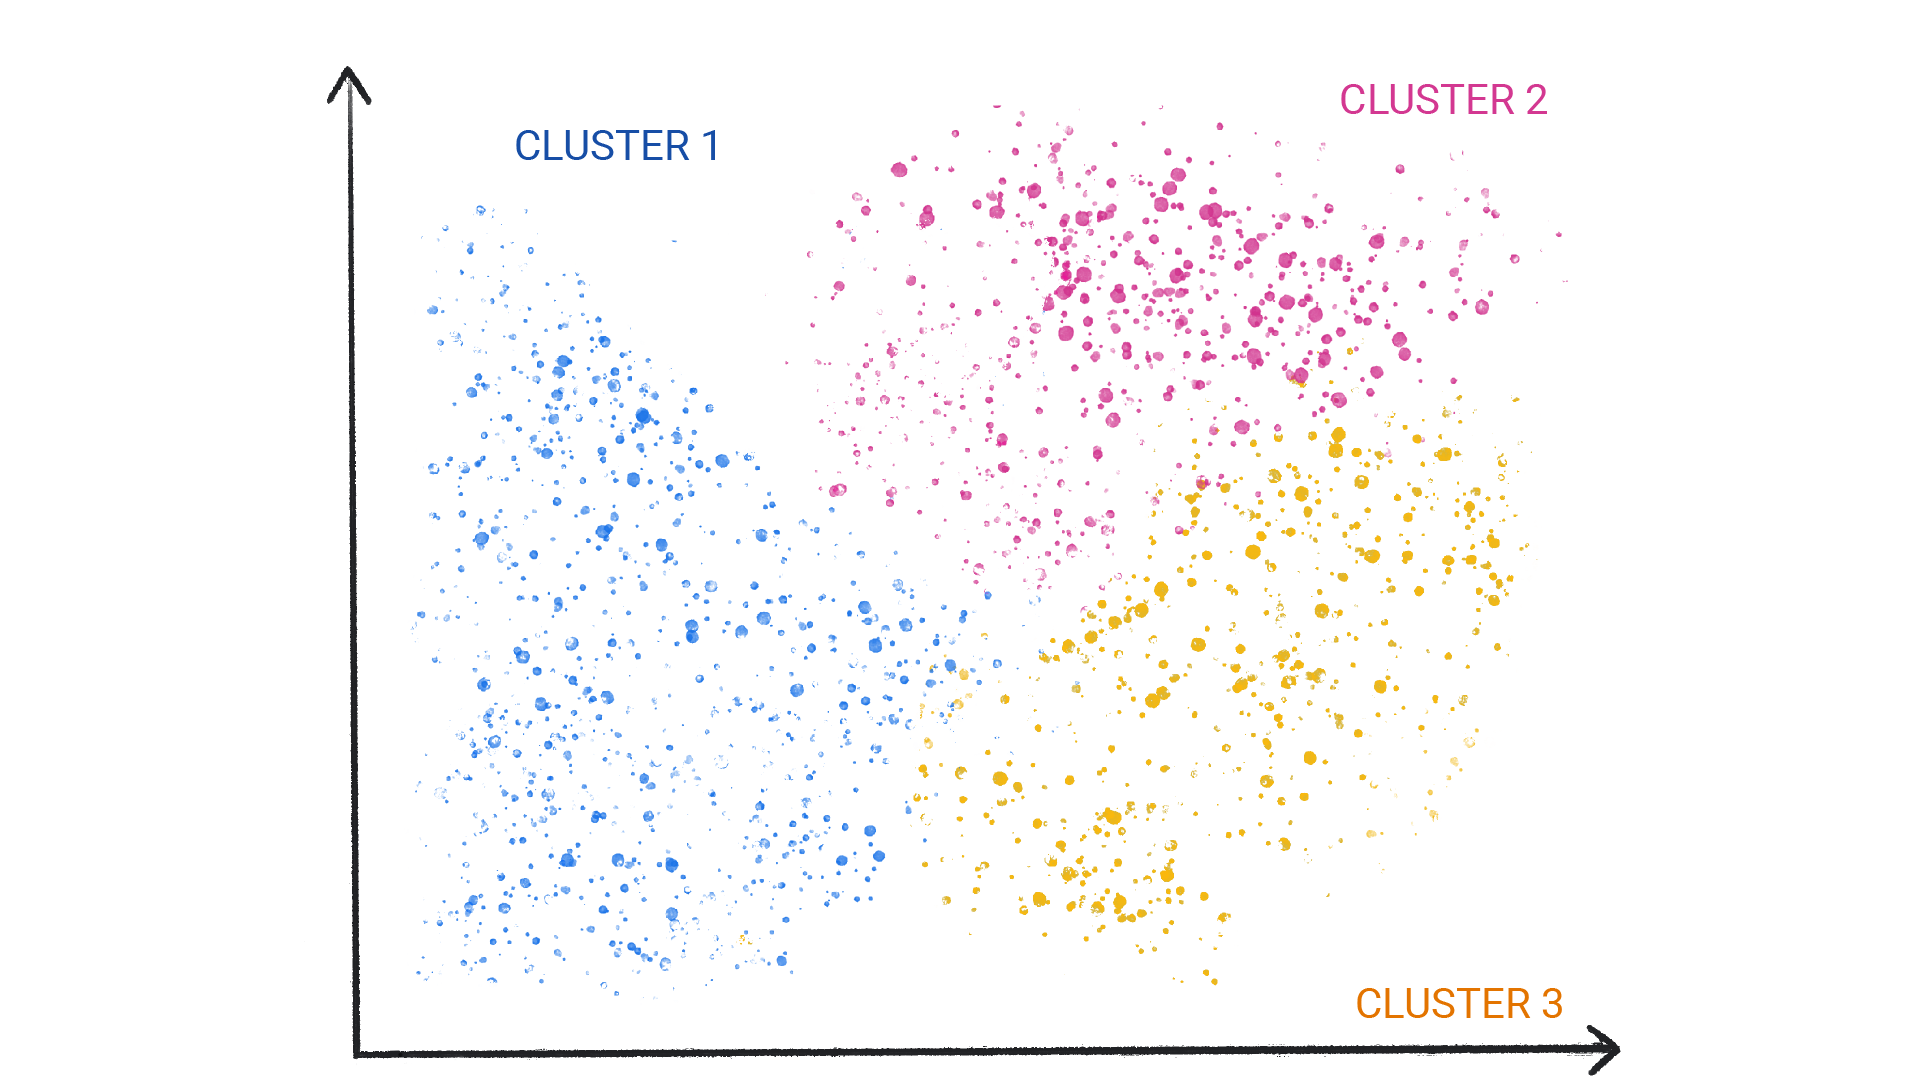 An image showing colored dots in clusters.